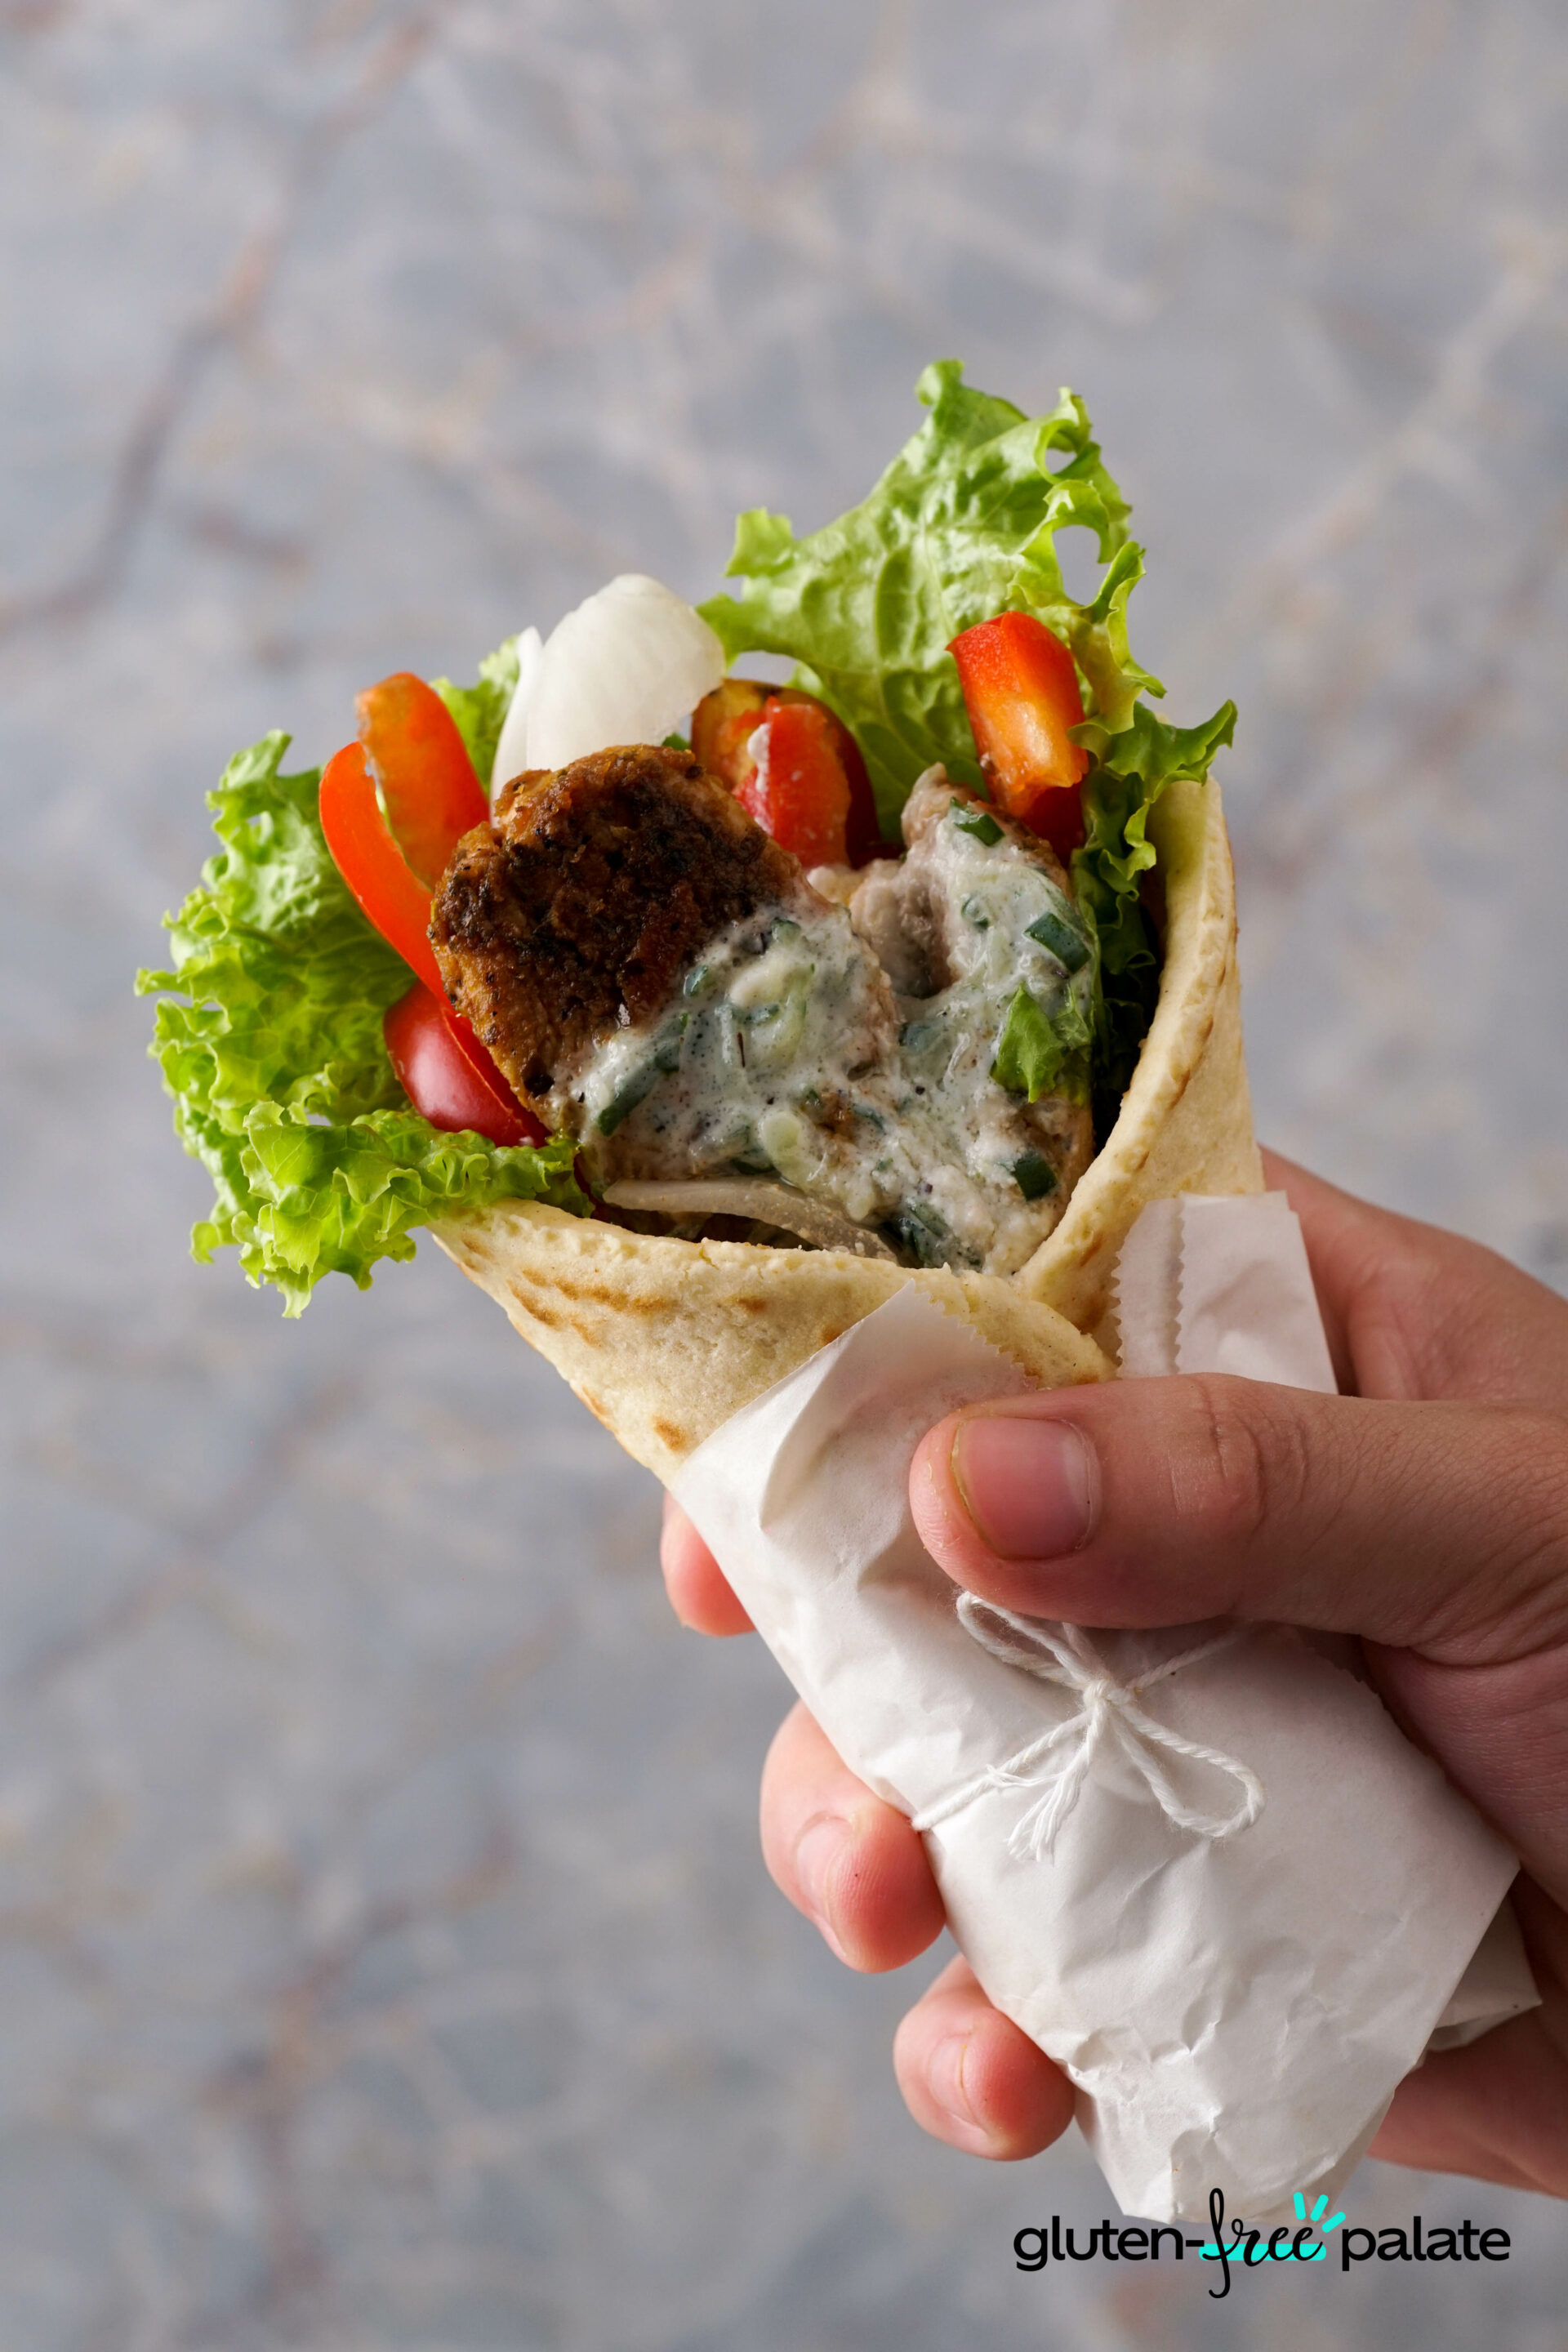 Yes, You Can Make Gyros at Home